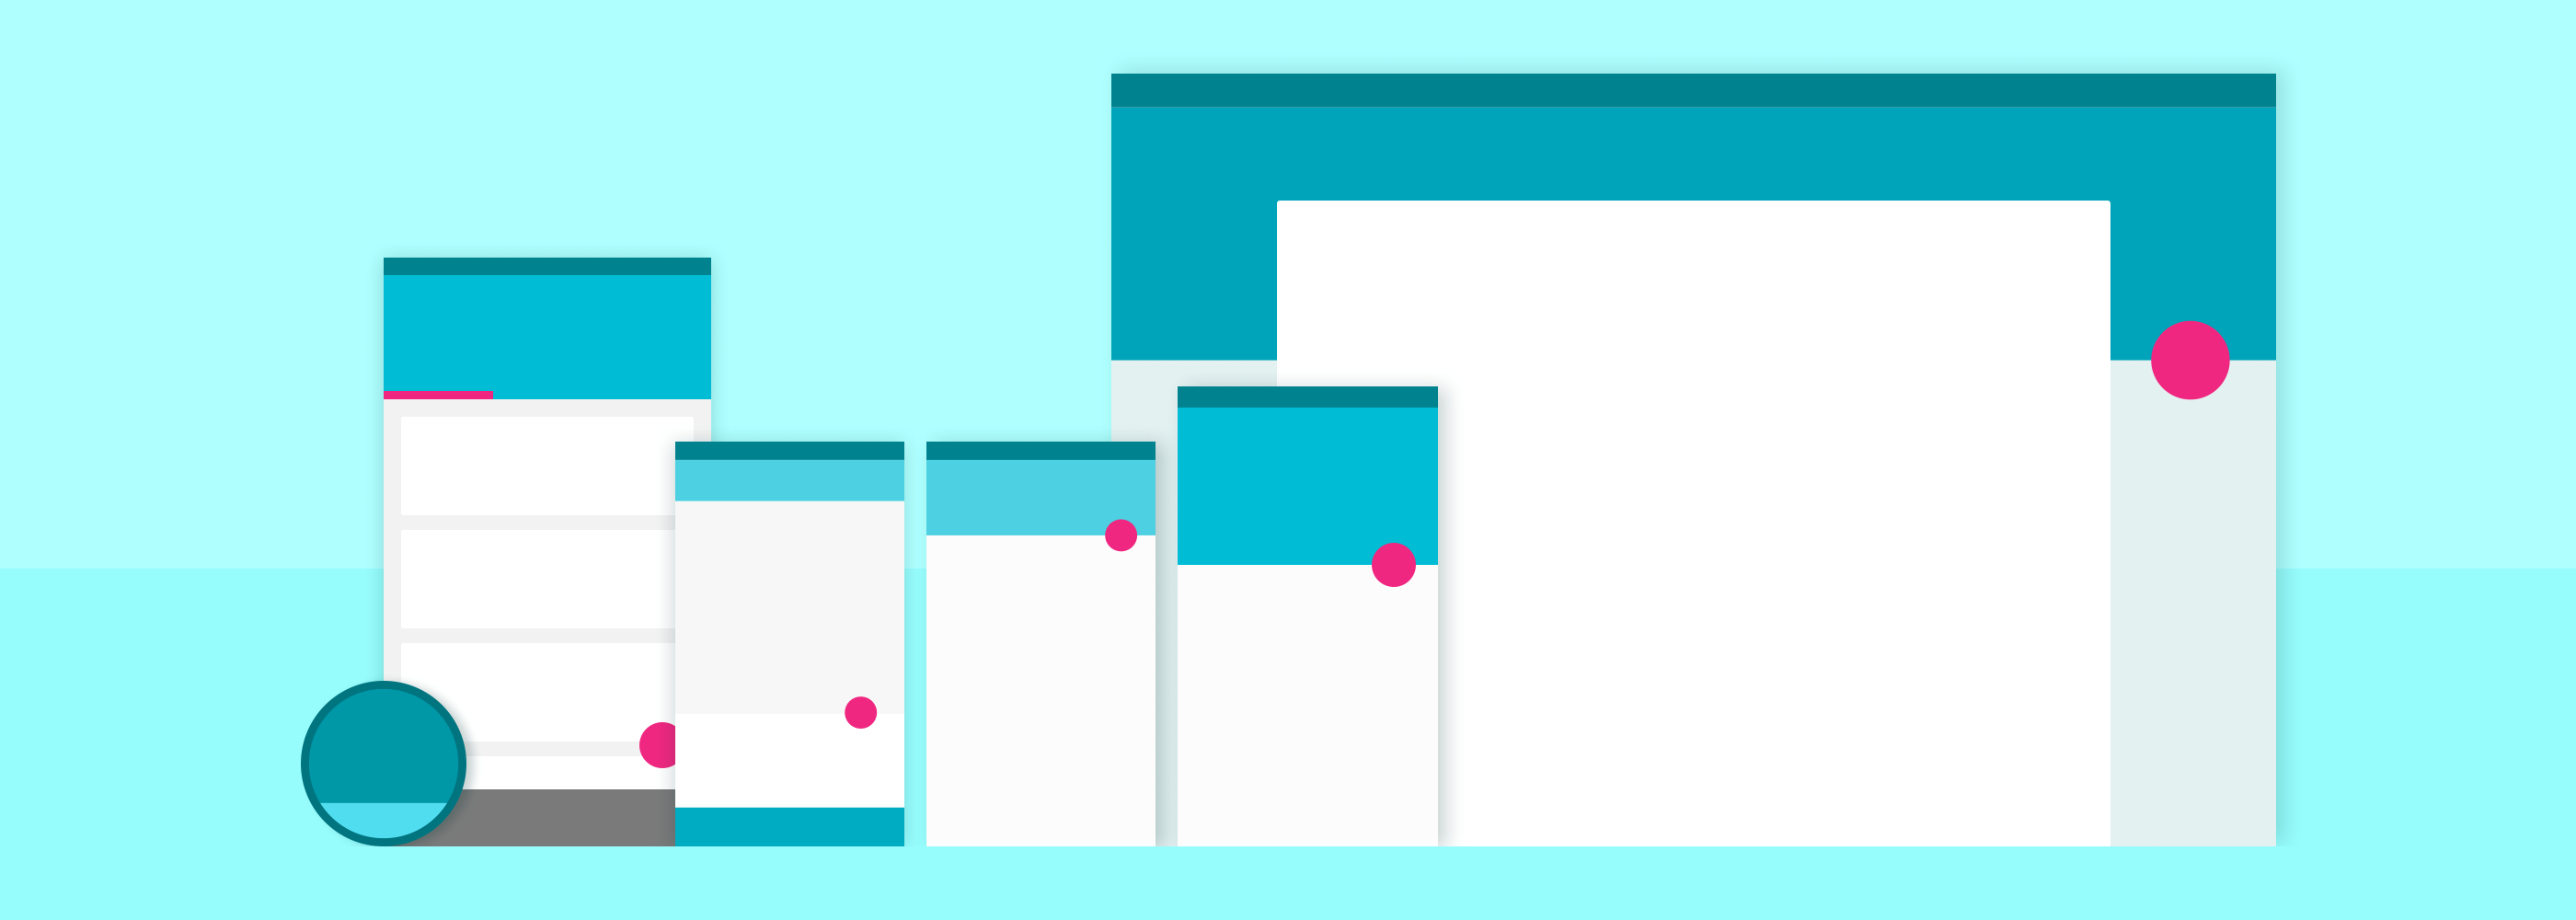 Eight don'ts for your Material Design app - Prototypr